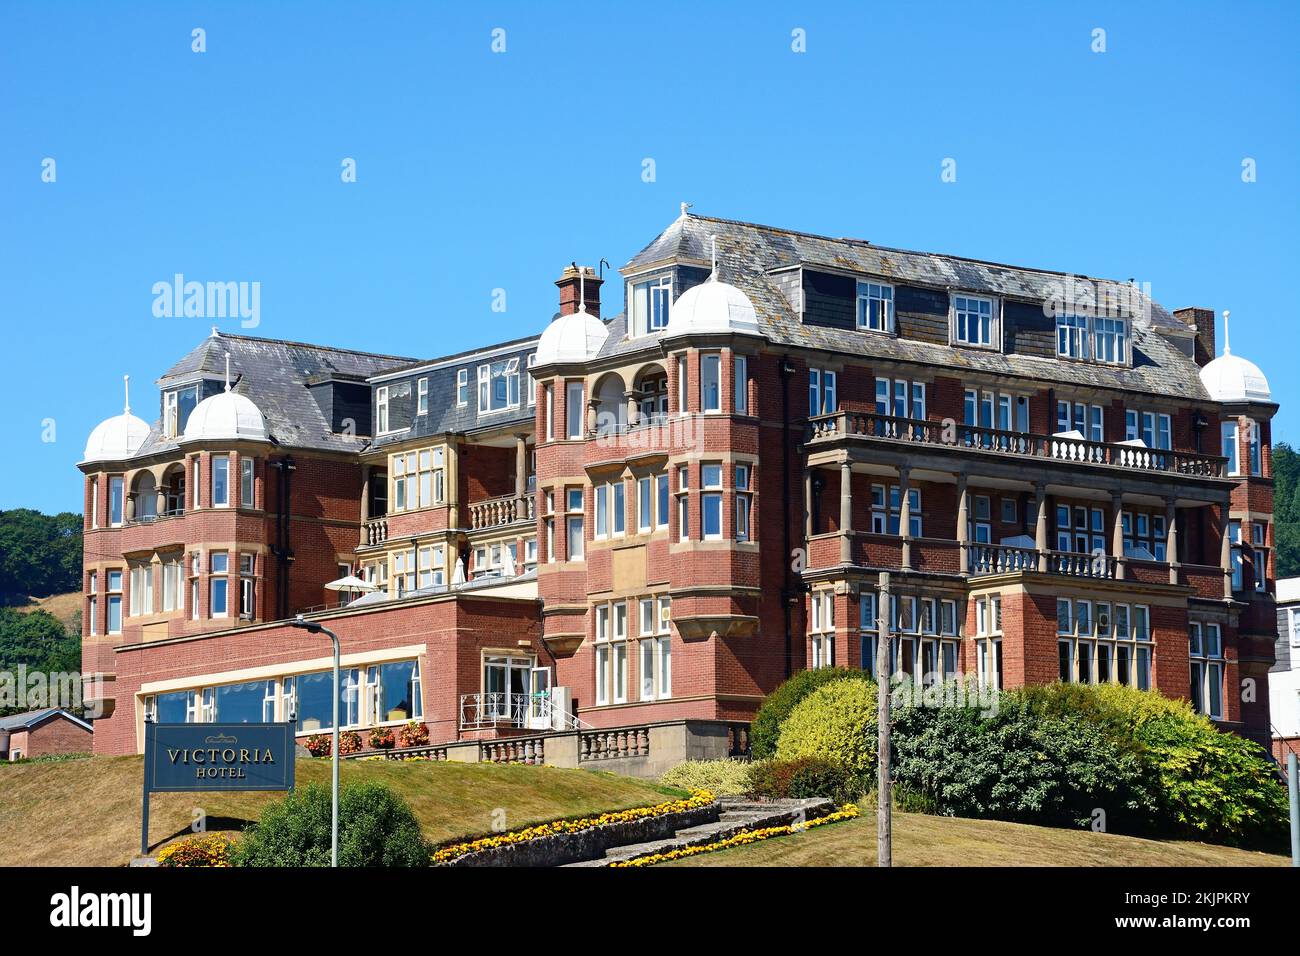 Front view of the Victoria Hotel, Sidmouth, Devon, UK, Europe. Stock Photo